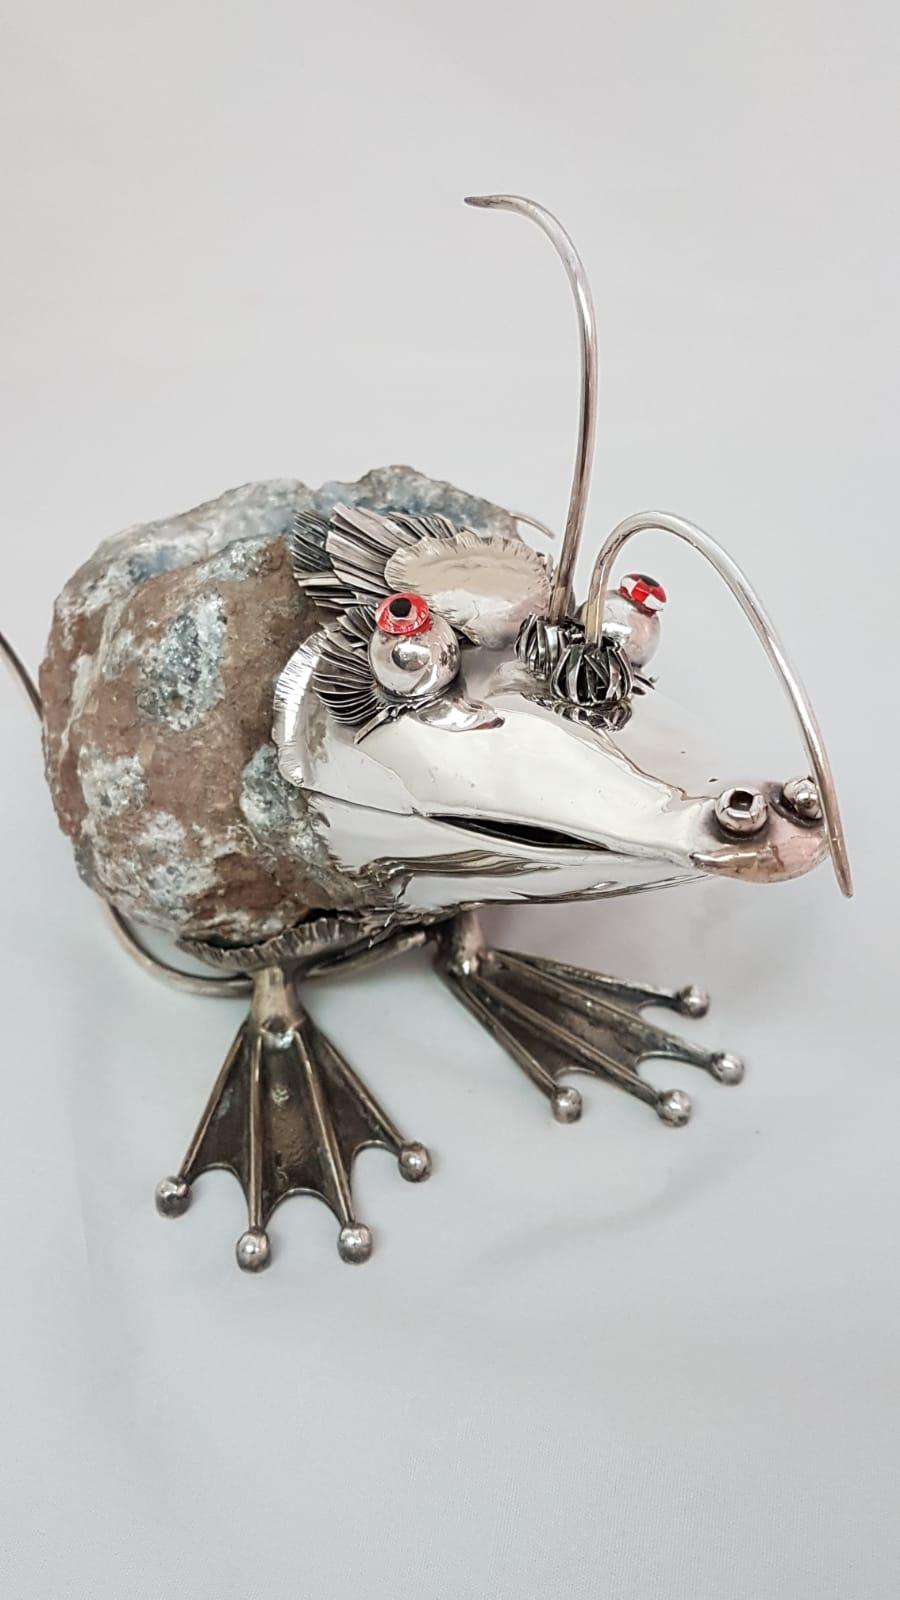 A unique piece of art, a sculpture representing a mouse in sterling silver, crystal rock, and precious stones. Signed De Vecchi. Very rare to find. Collectible item.